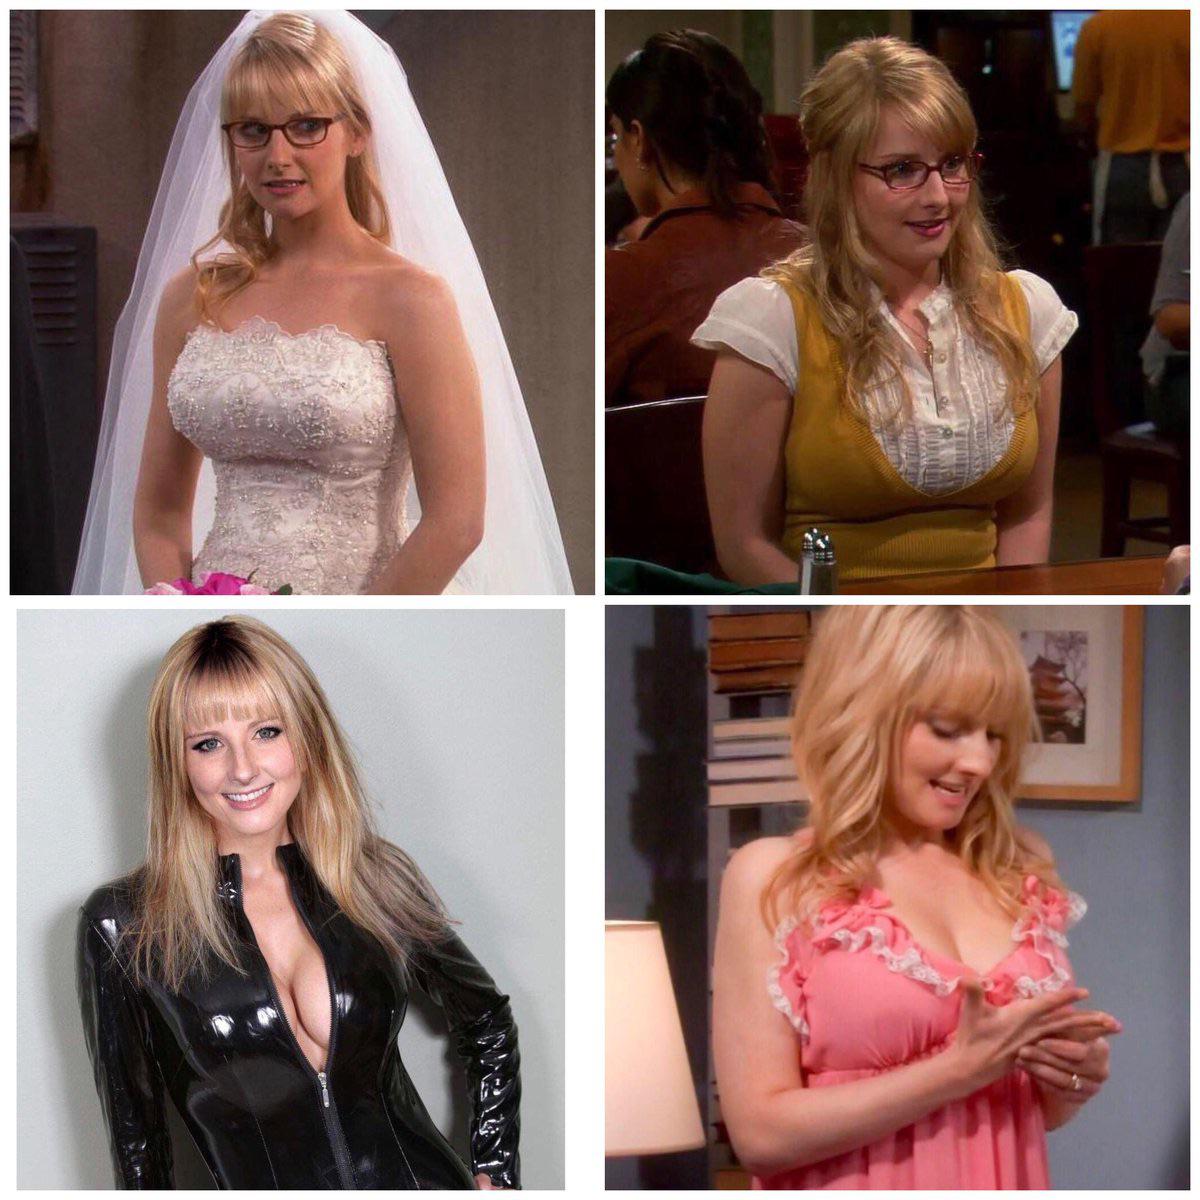 Melissa Rauch really has an underrated pair of tits